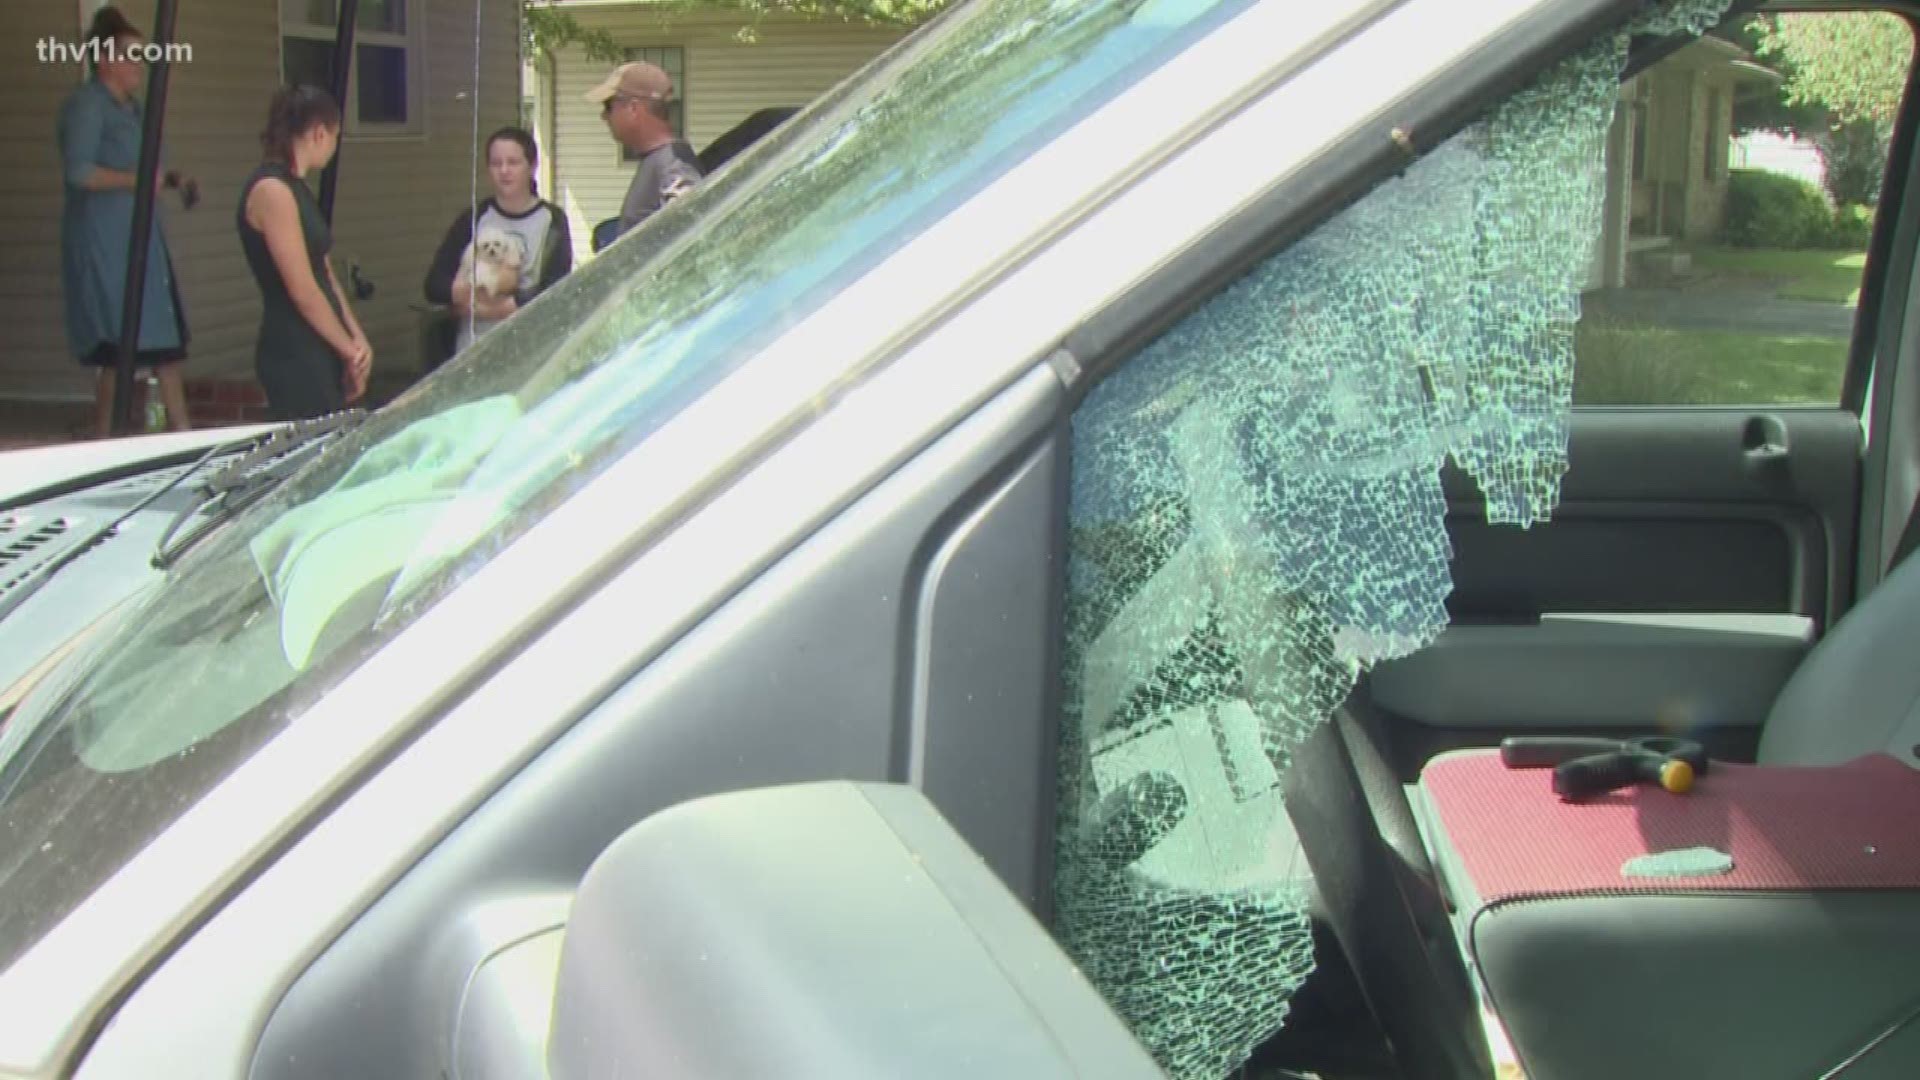 North Little Rock residents are growing concerned about crime after a person was murdered and several cars were broken into over the weekend.